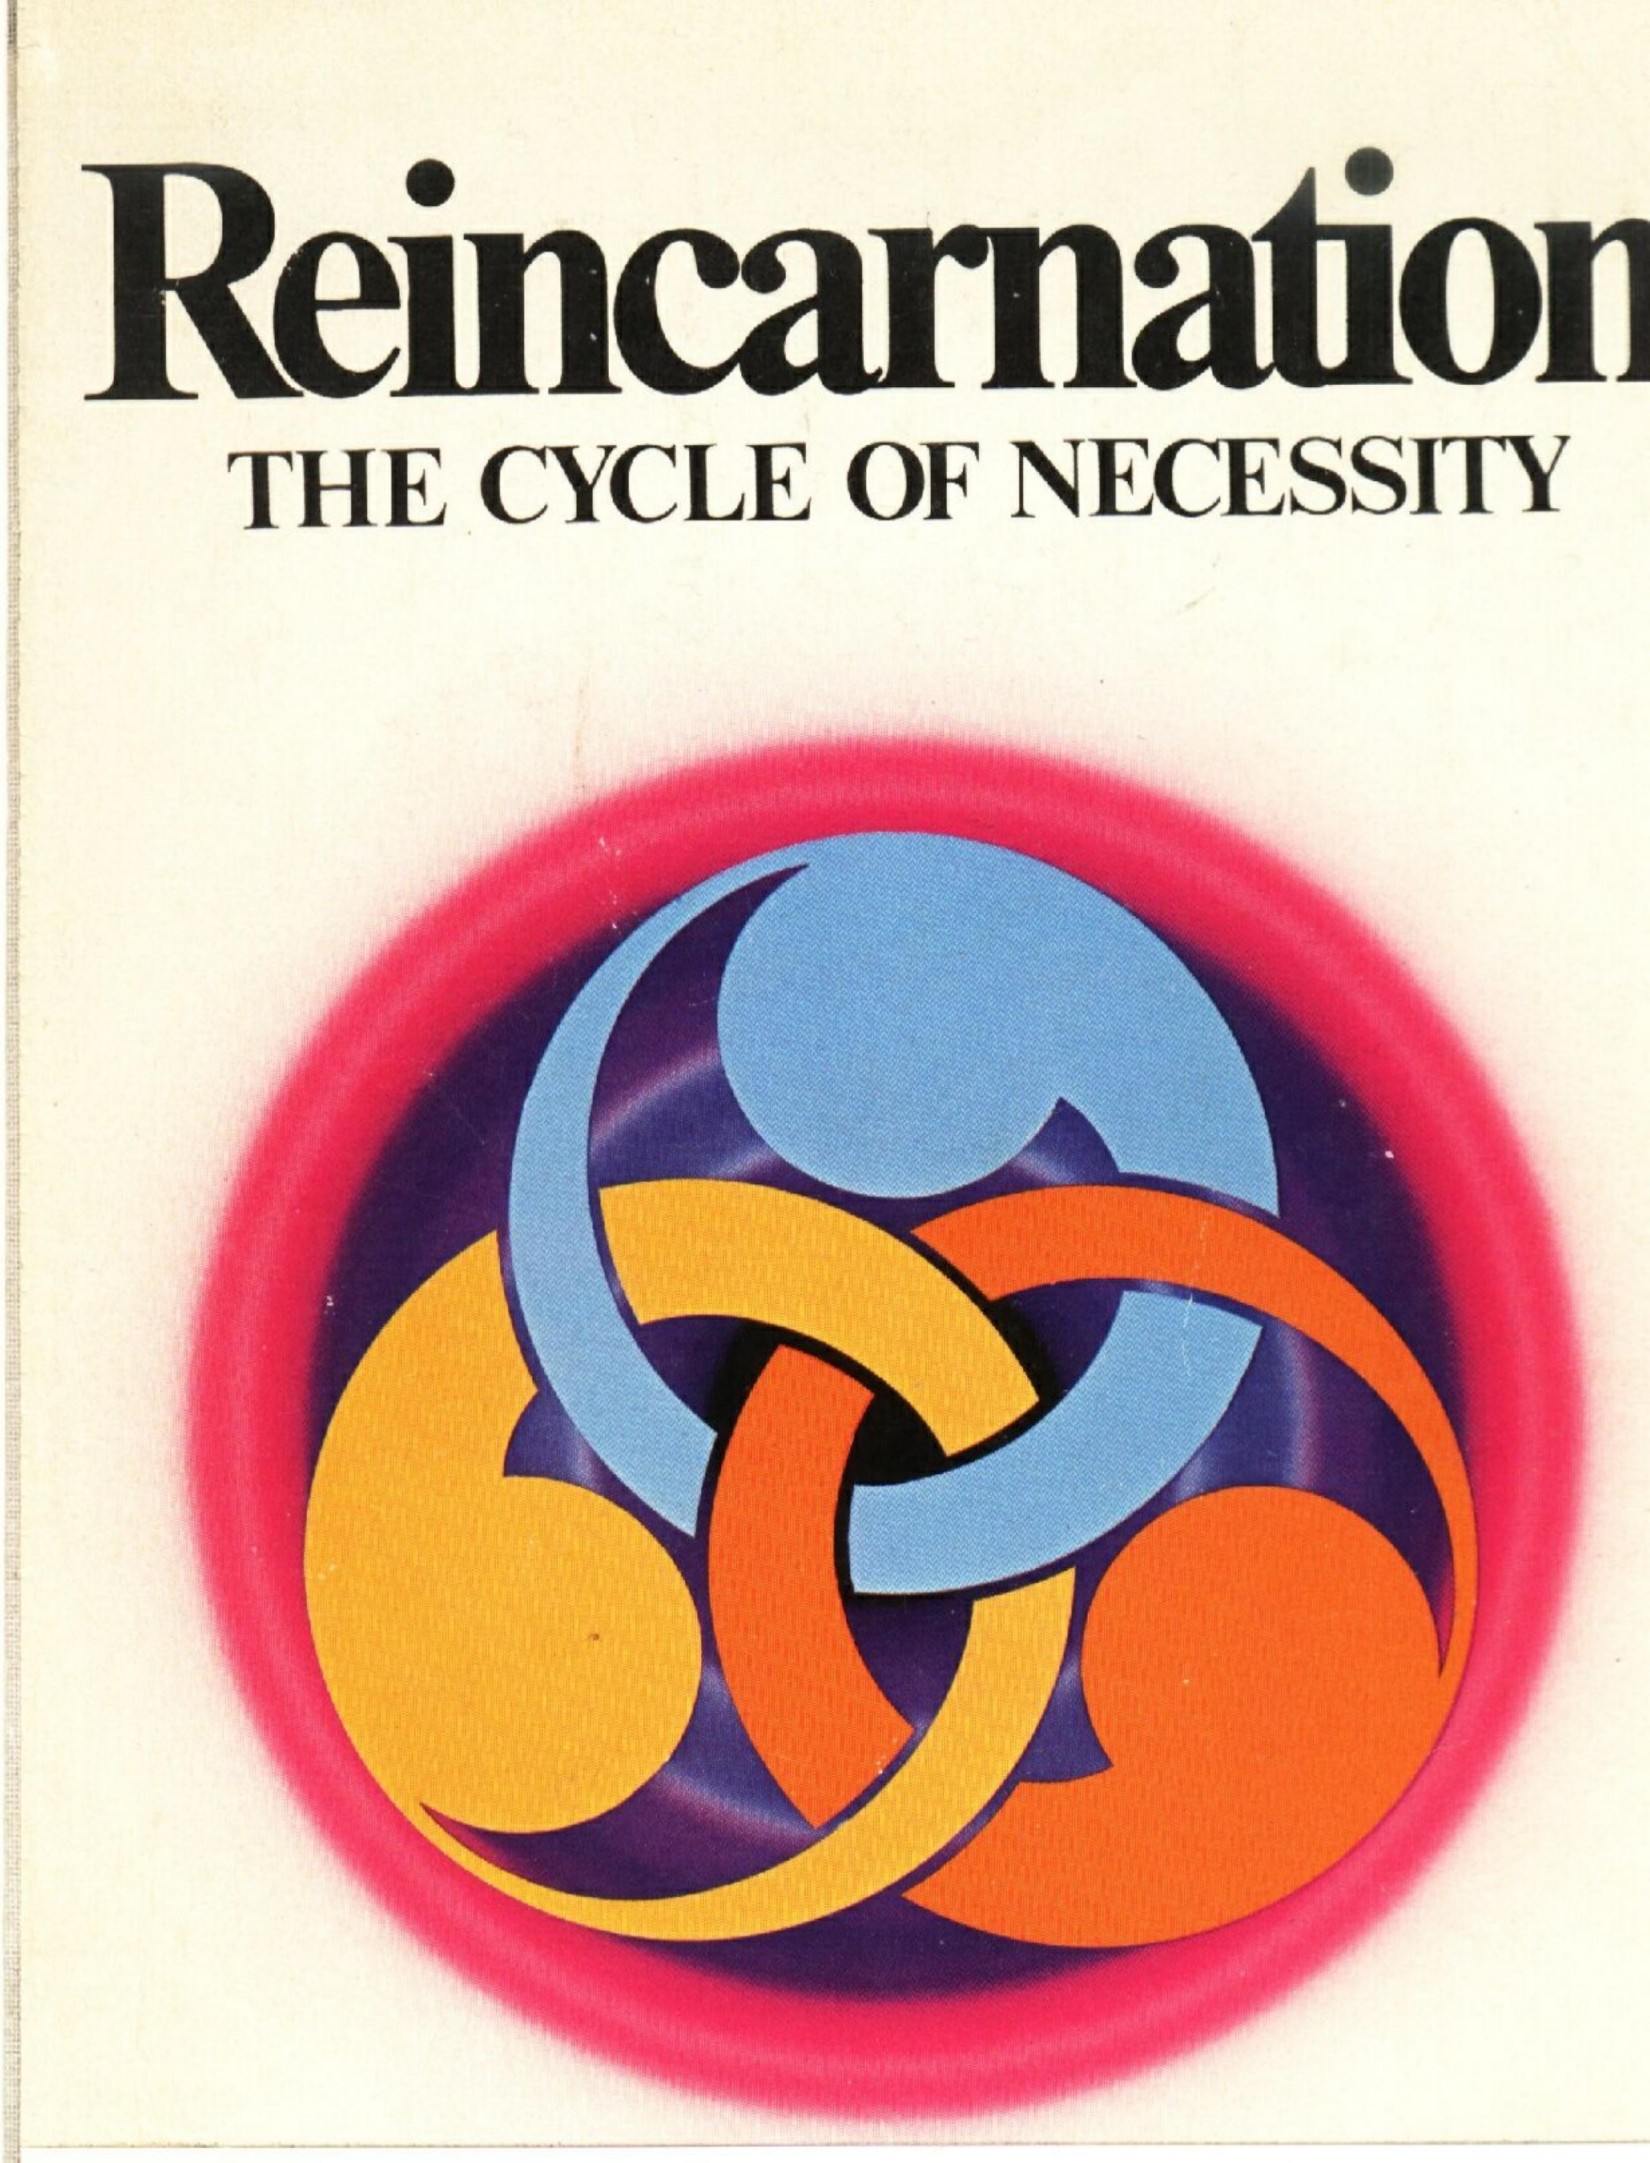 Reincarnation, the Cycle of Necessity